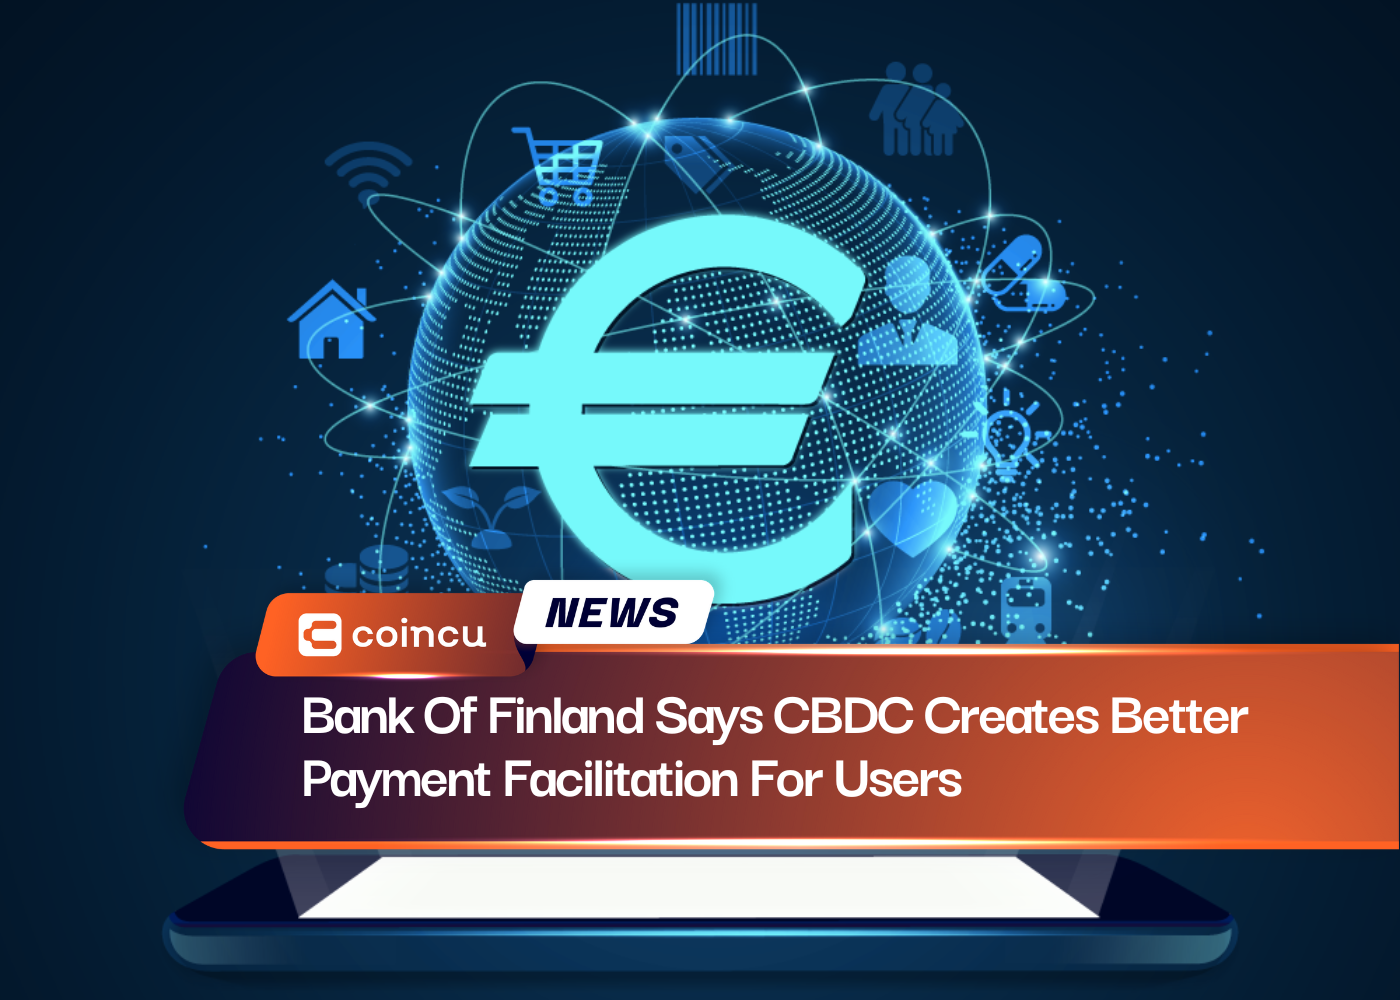 Bank Of Finland Says CBDC Creates Better Payment Facilitation For Users